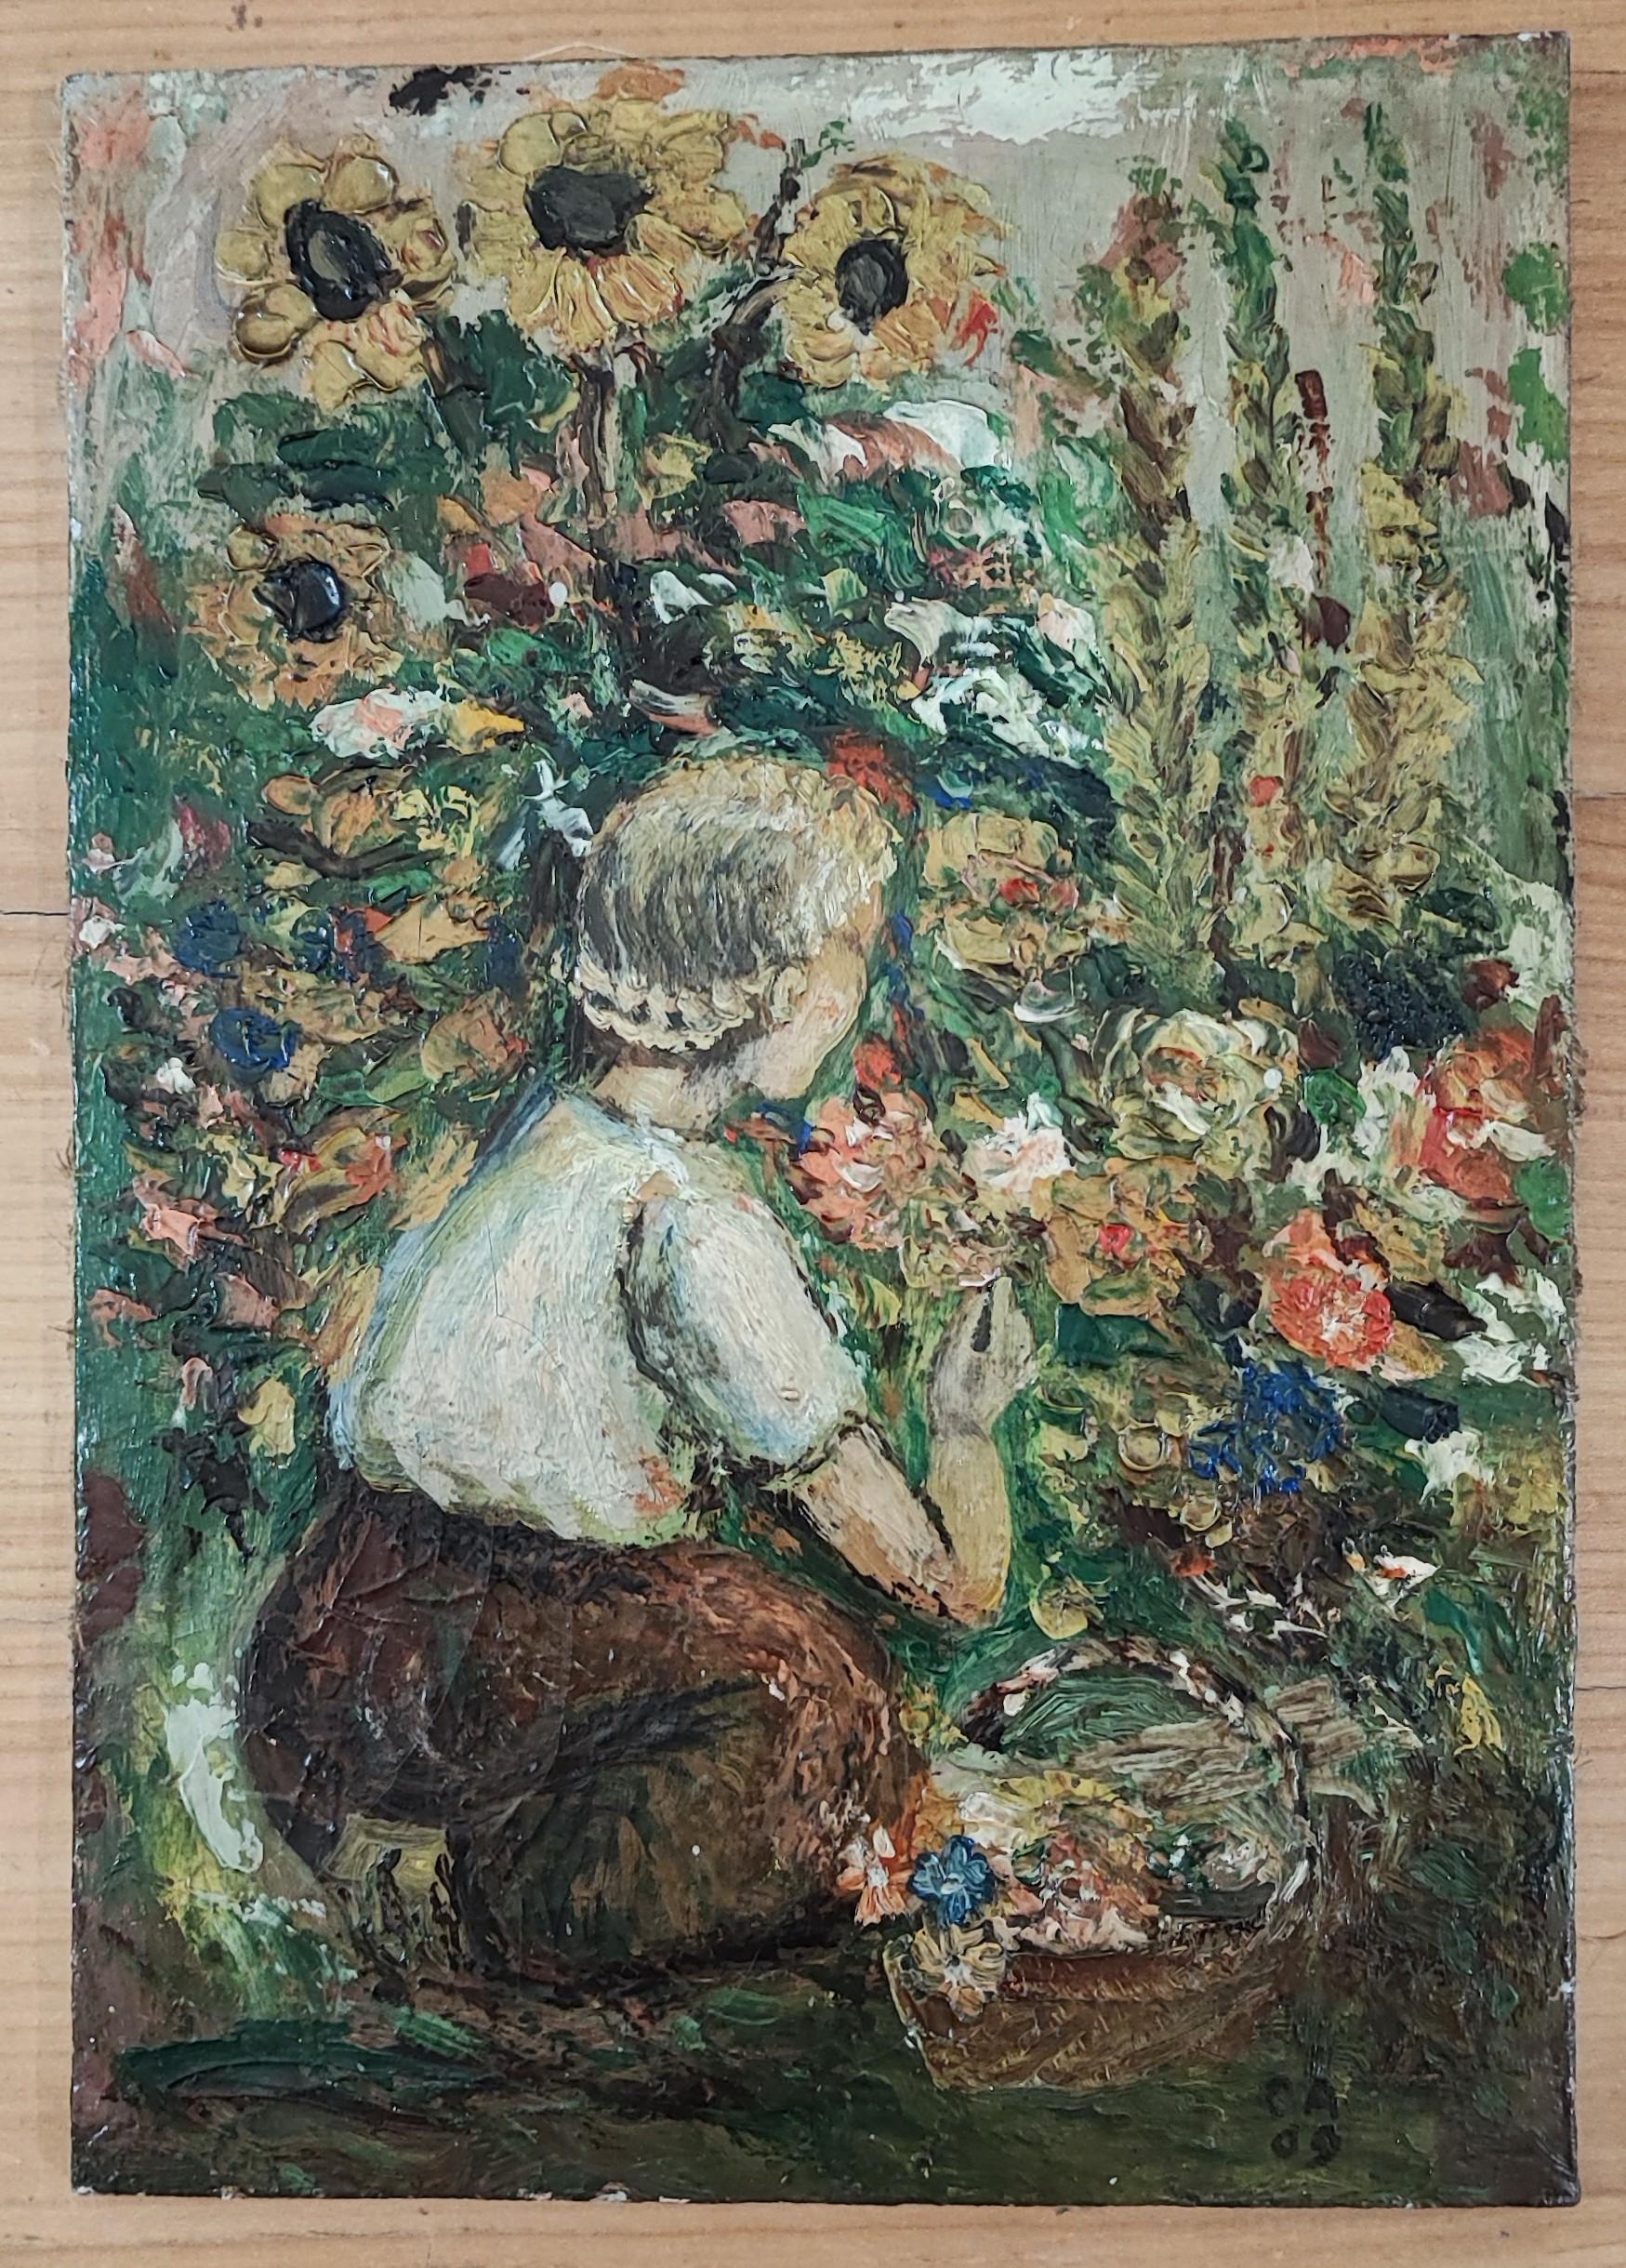 Young girl picking flowers - Painting by C.A.